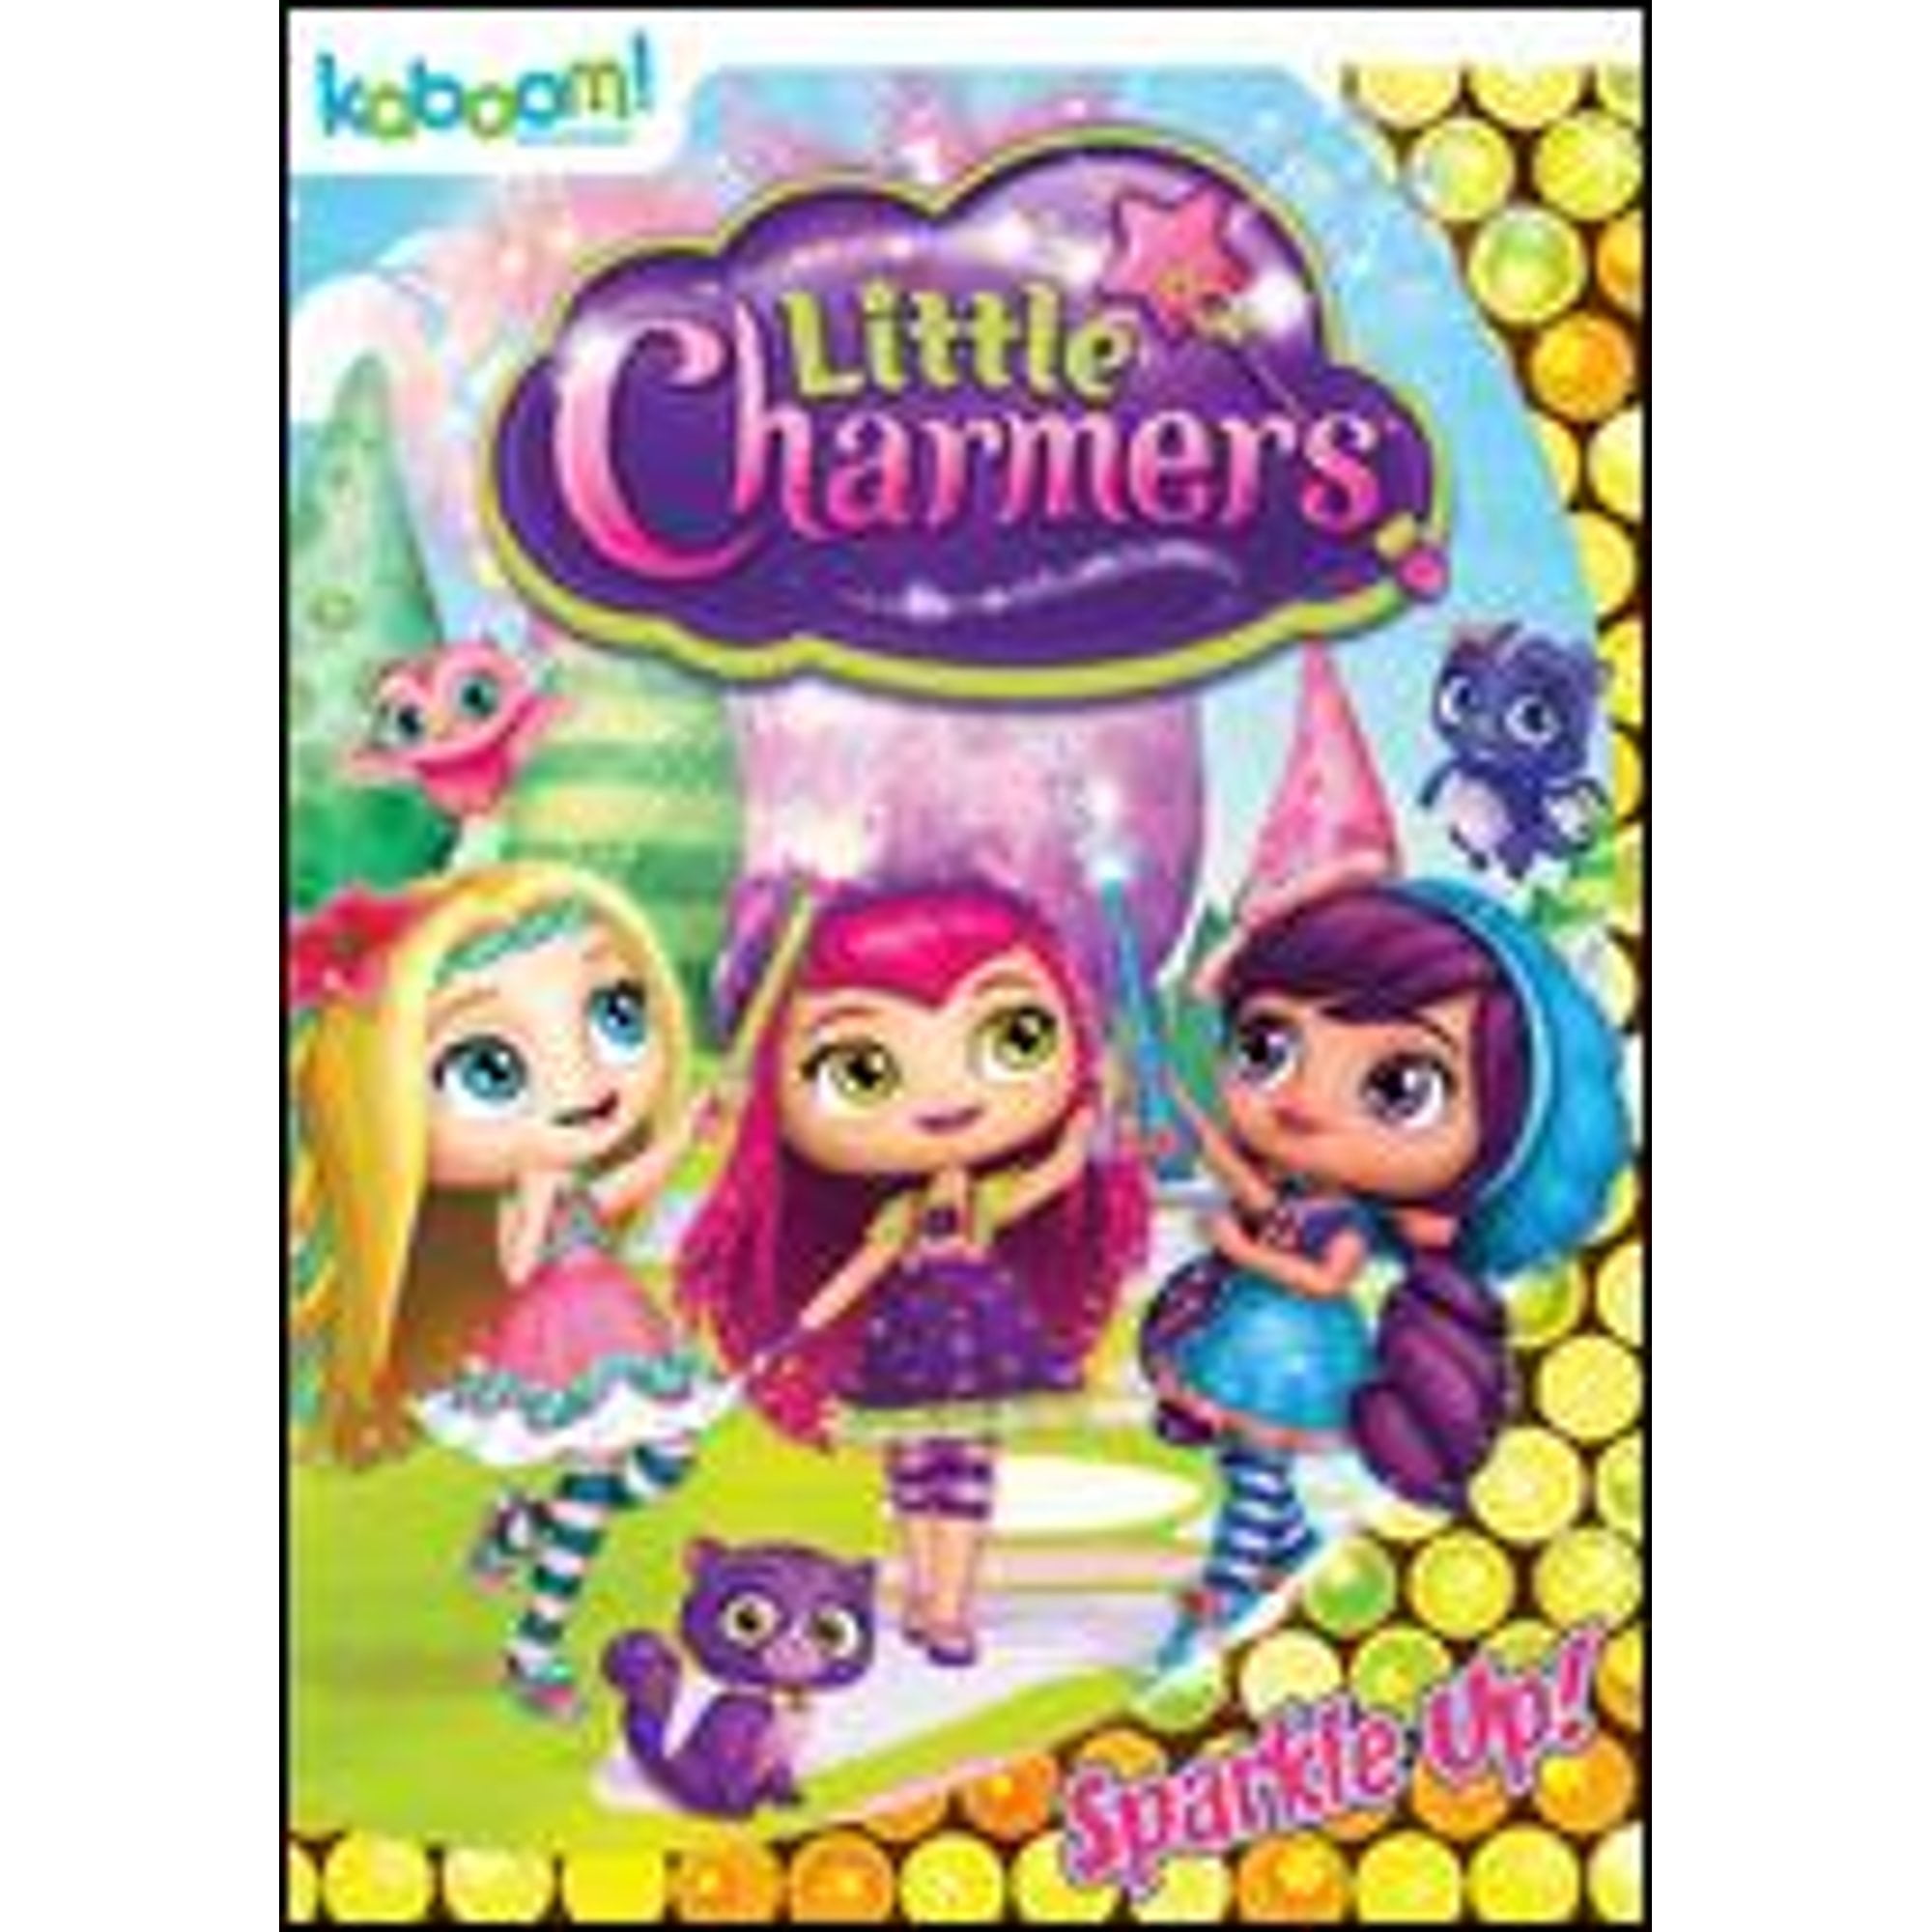 Little Charmers: Sparkle Up! (Pre-Owned DVD 0625828644580) - Walmart.com